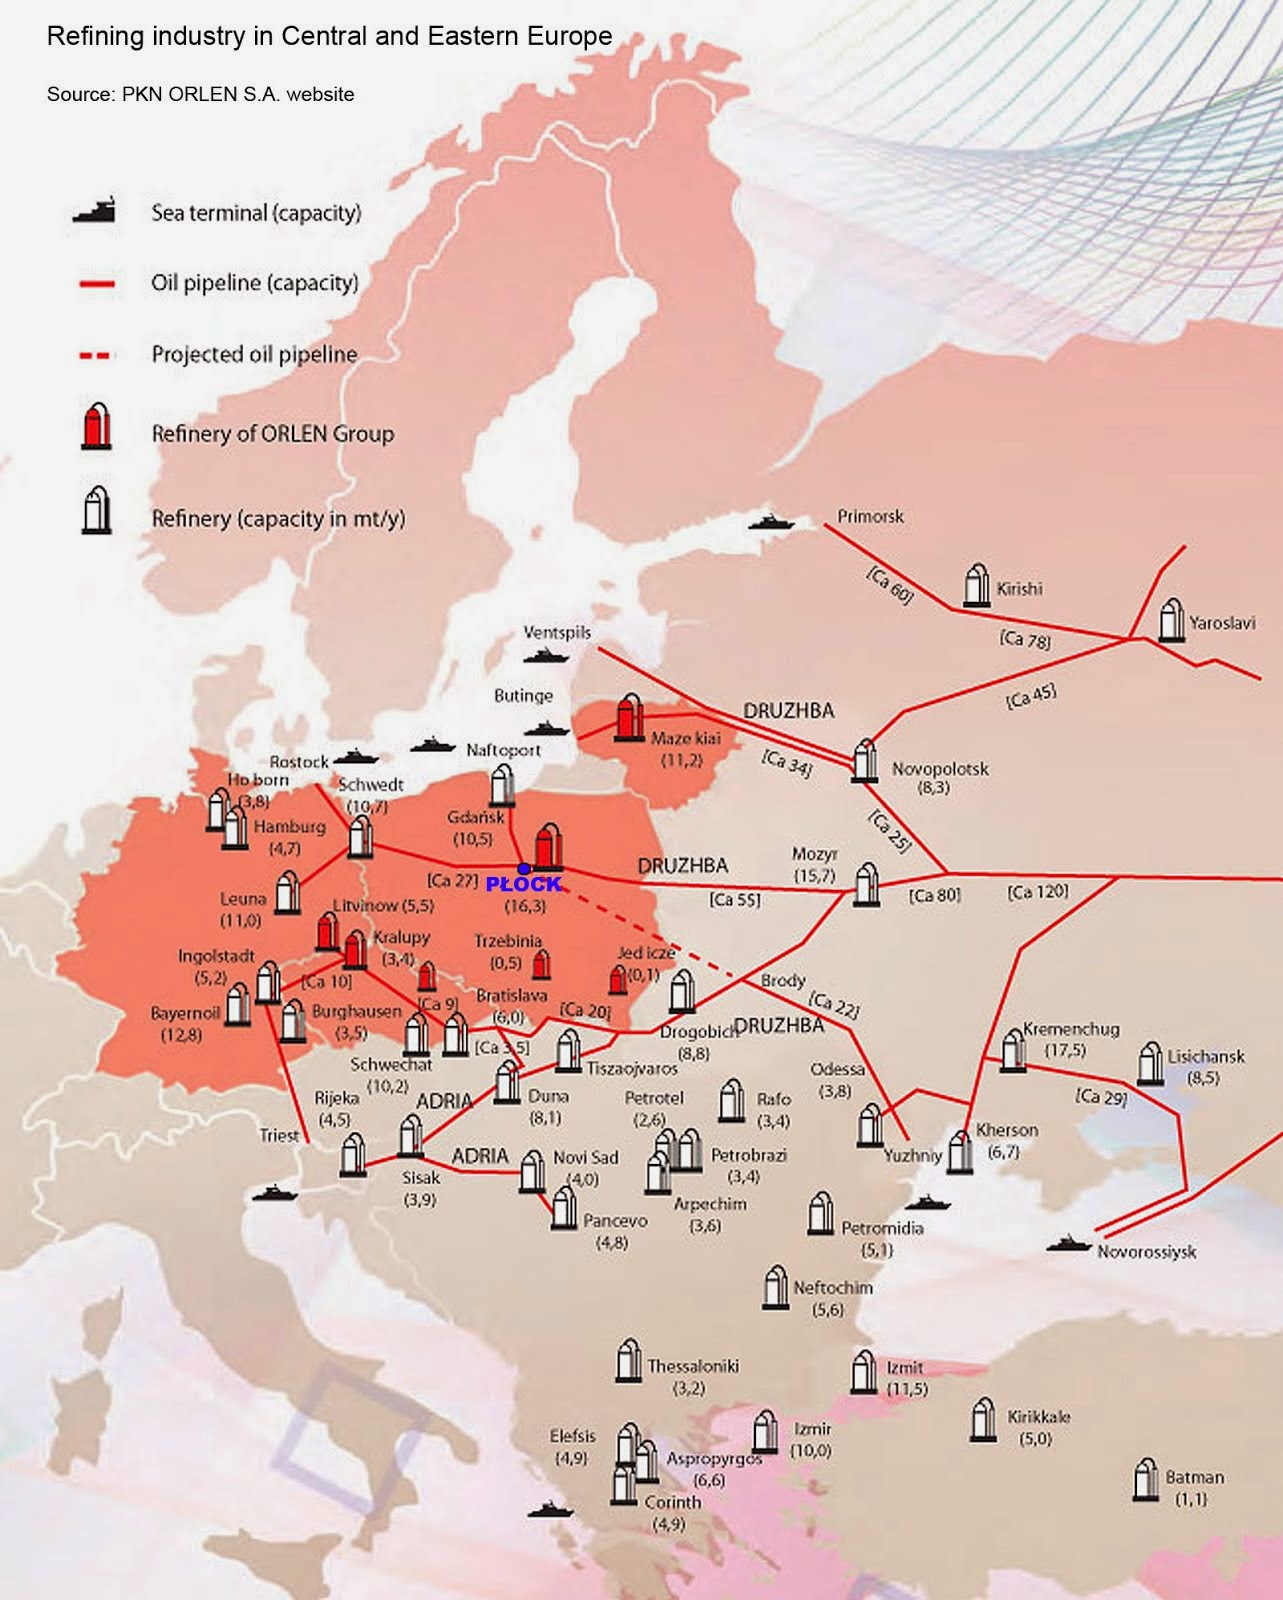 Refining industry in Central and Eastern Europe